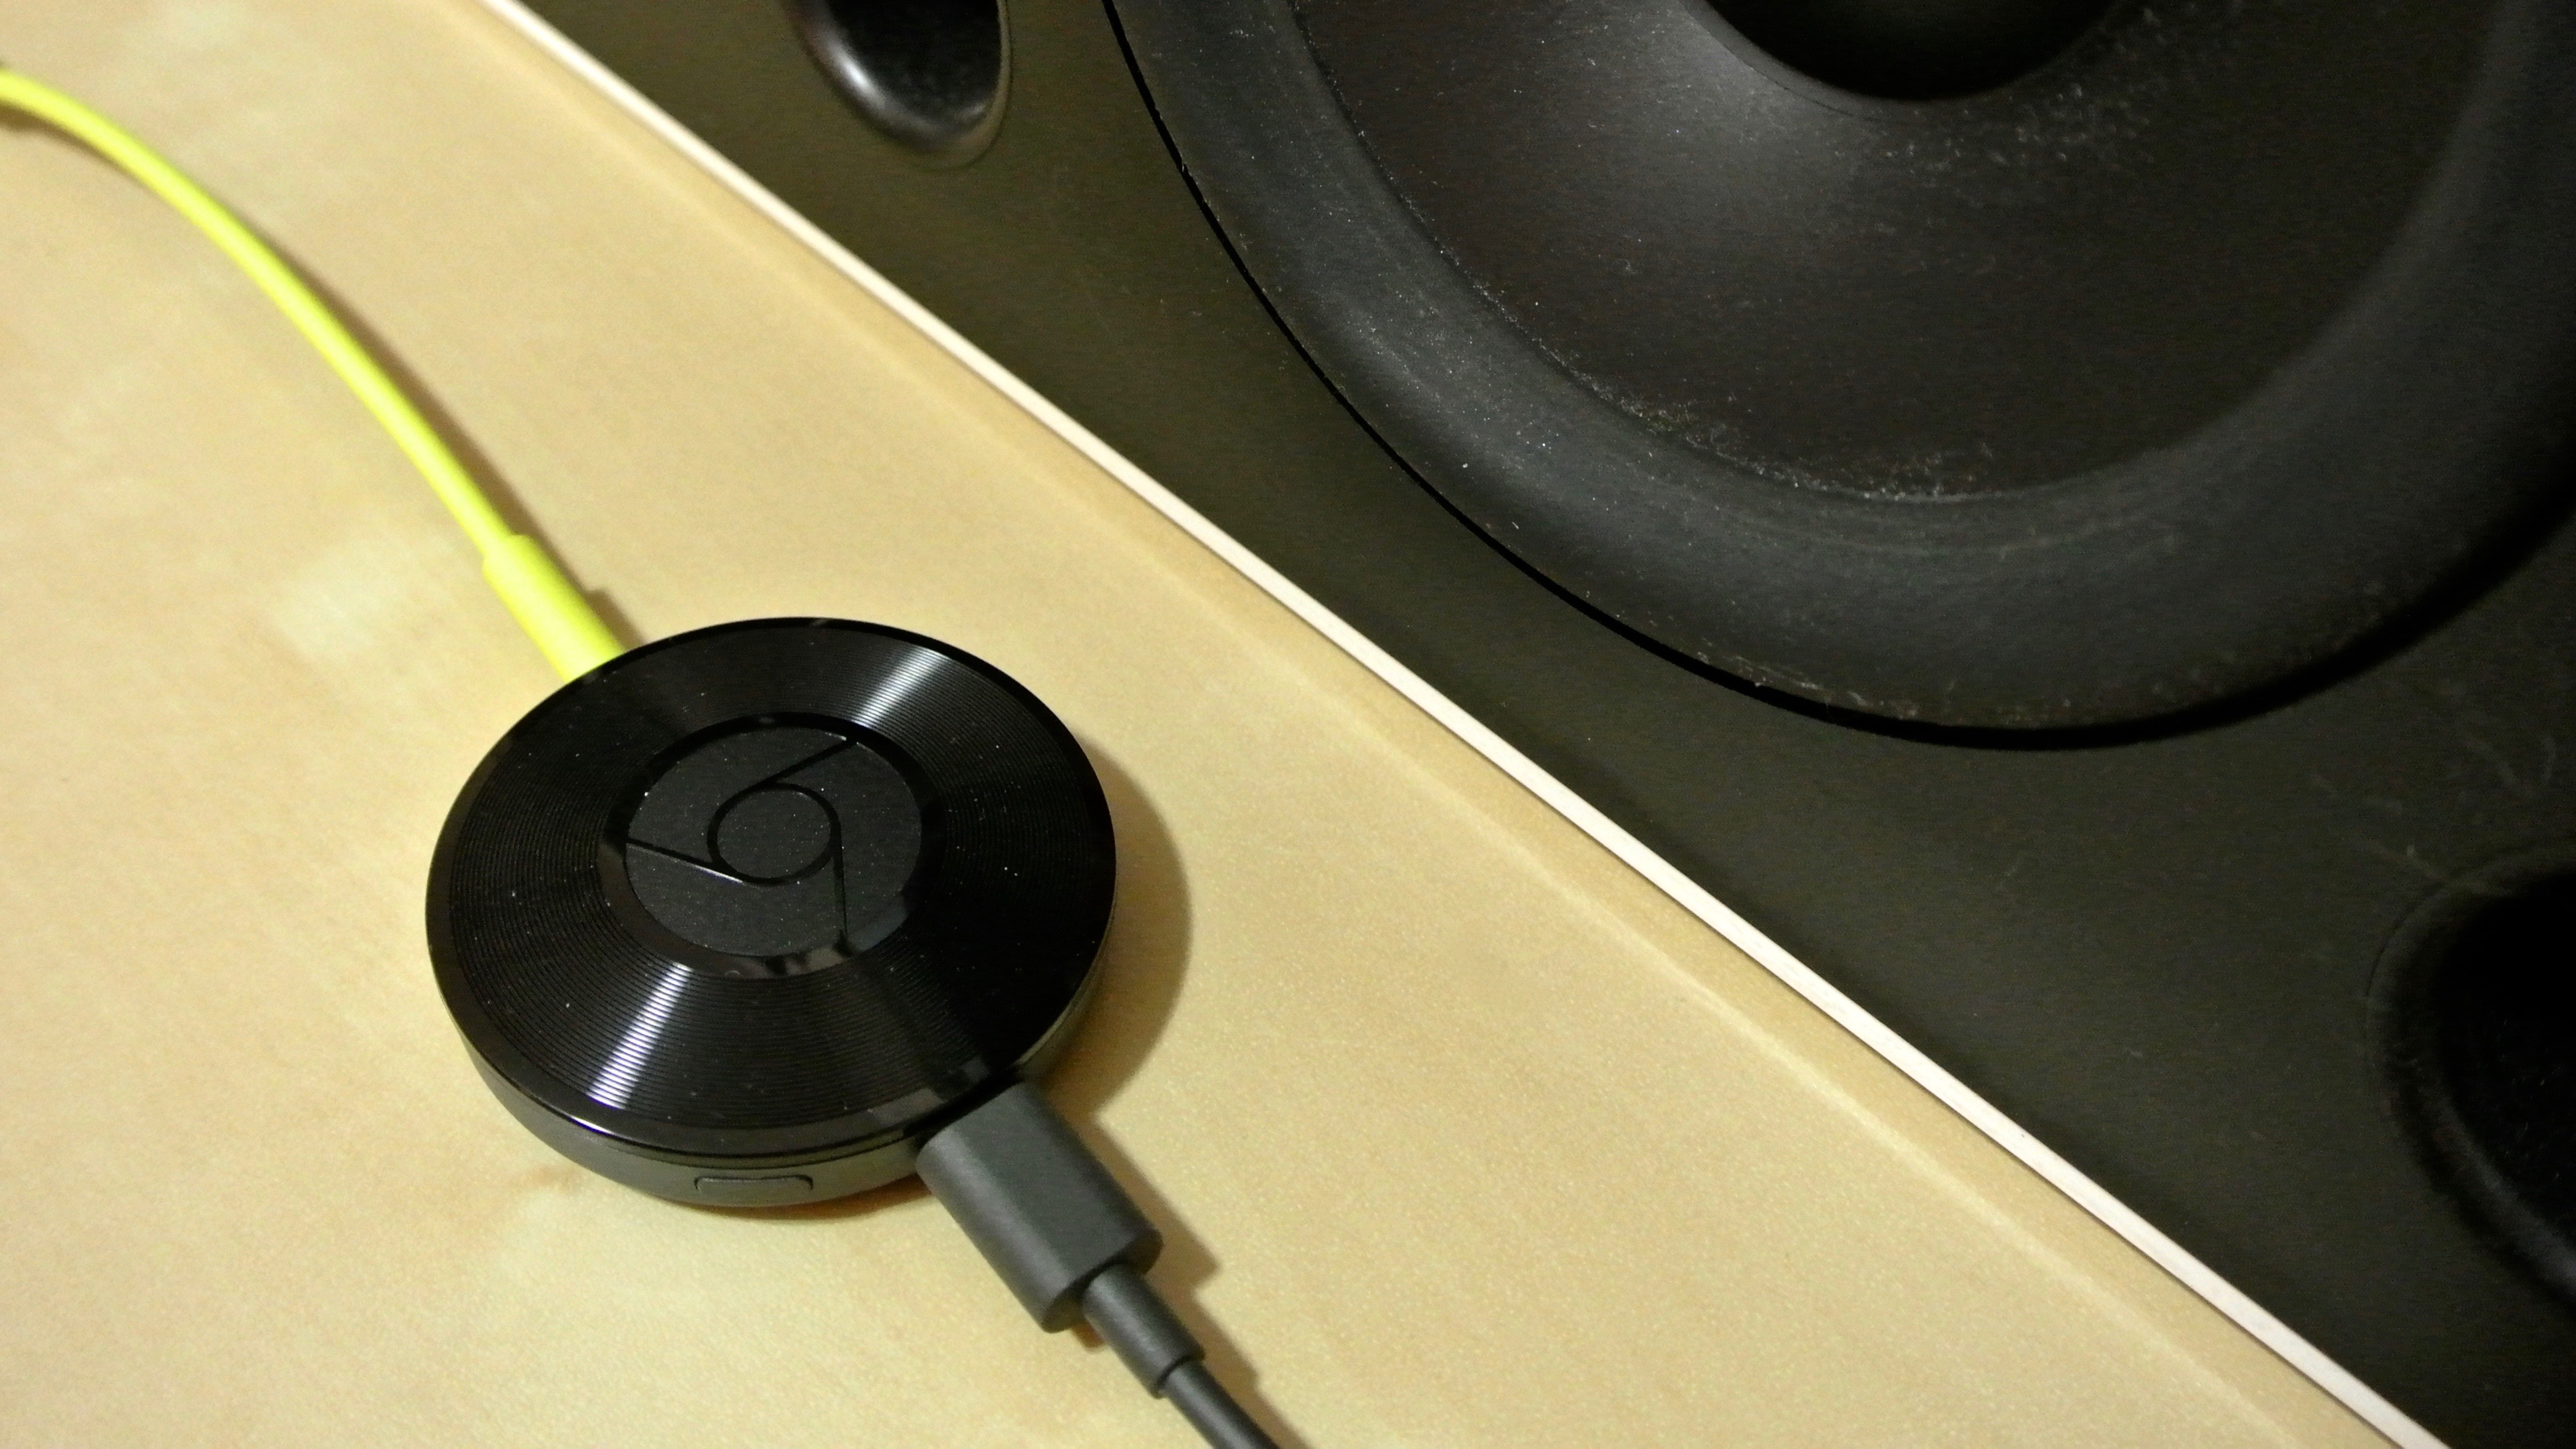 Review: Chromecast Audio brings new life to dated speakers for just 9to5Mac